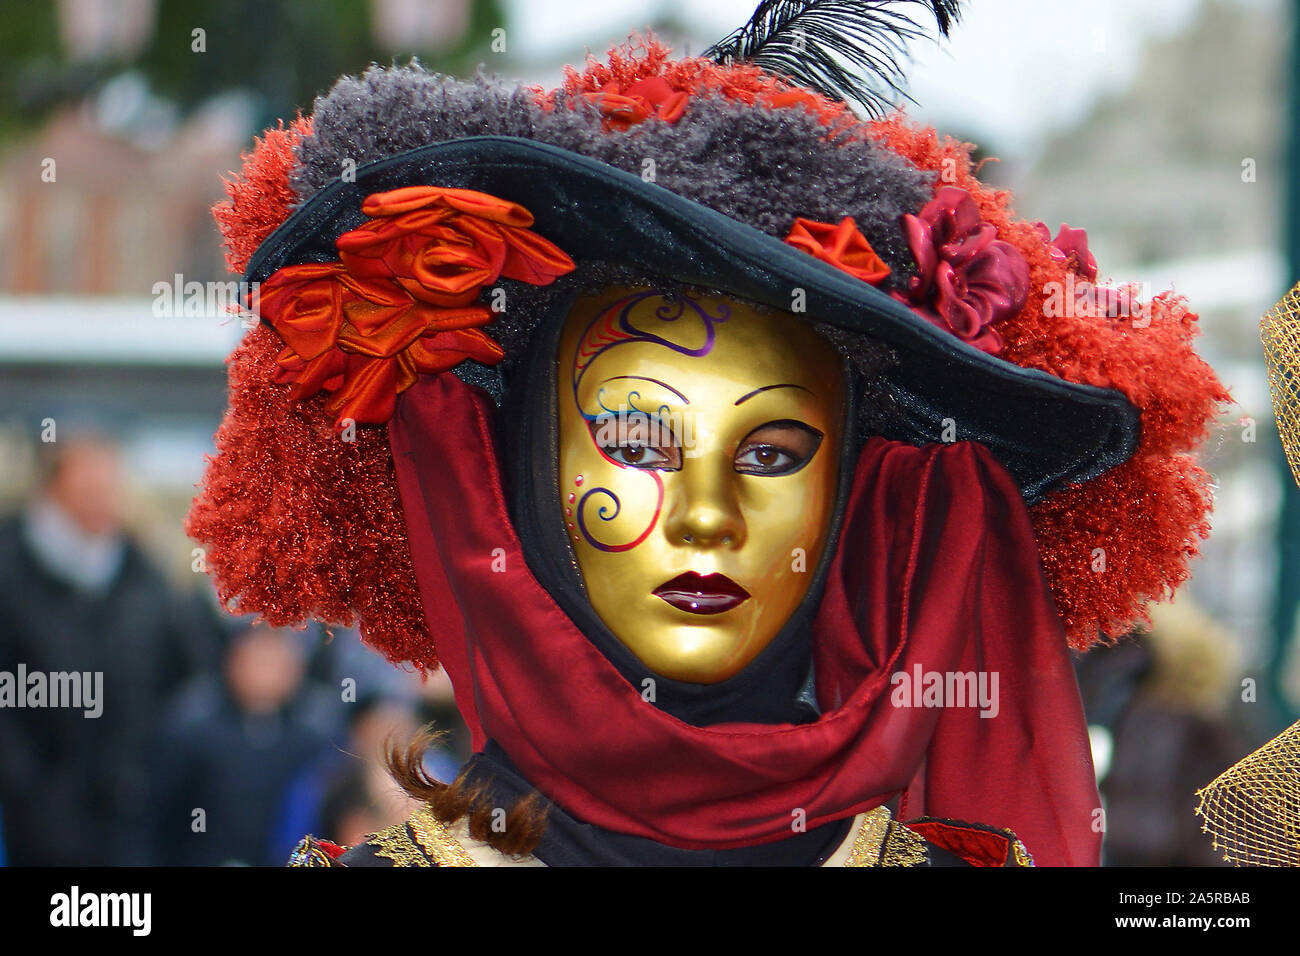 Europe, Italy, Carneval Venice, People with Mask and Costume, Stock Photo